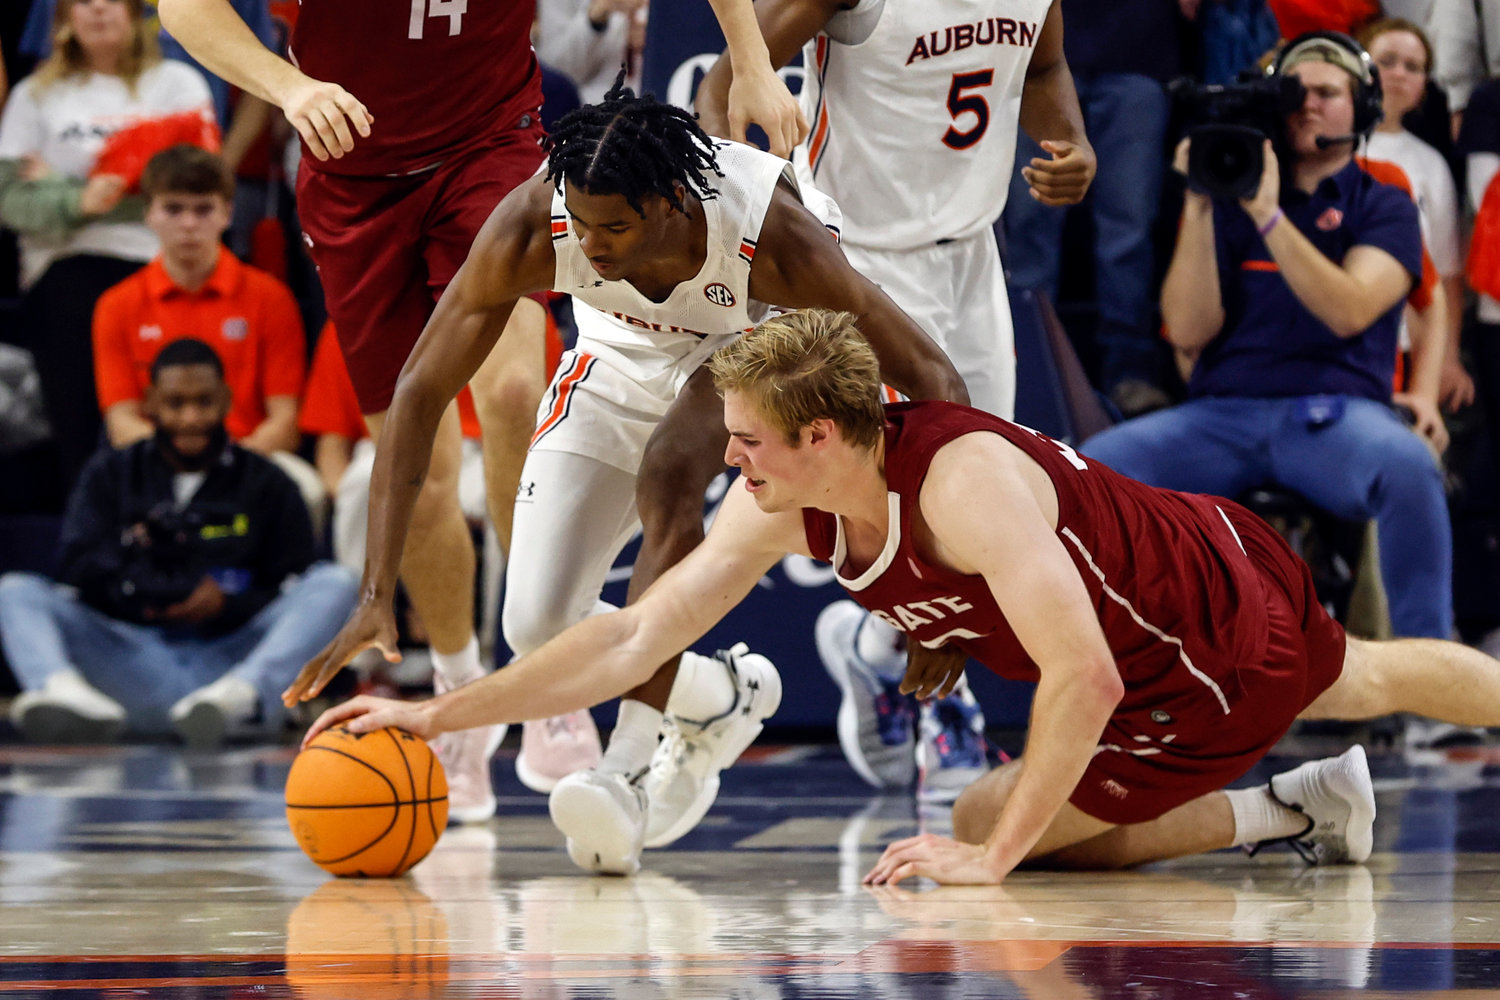 Auburn guard Chance Westry, left, and Colgate forward Sam Thomson, right, scramble for the ball during the first half of Friday night's game in Auburn, Ala. Auburn won 93-66.